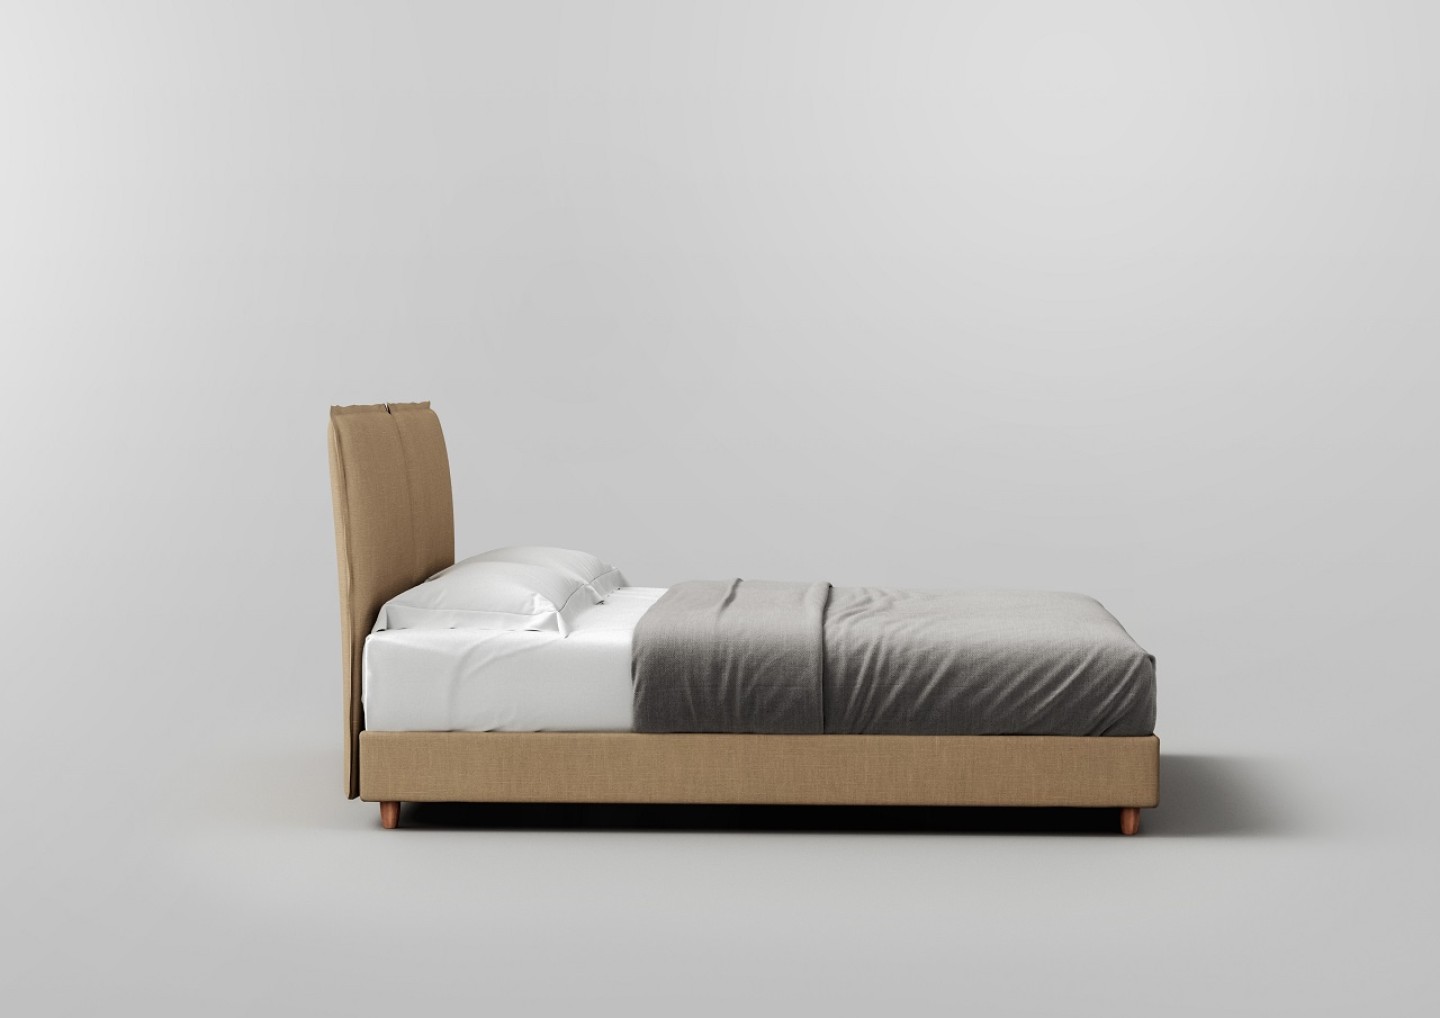 THE LOFT BED by Elite Strom